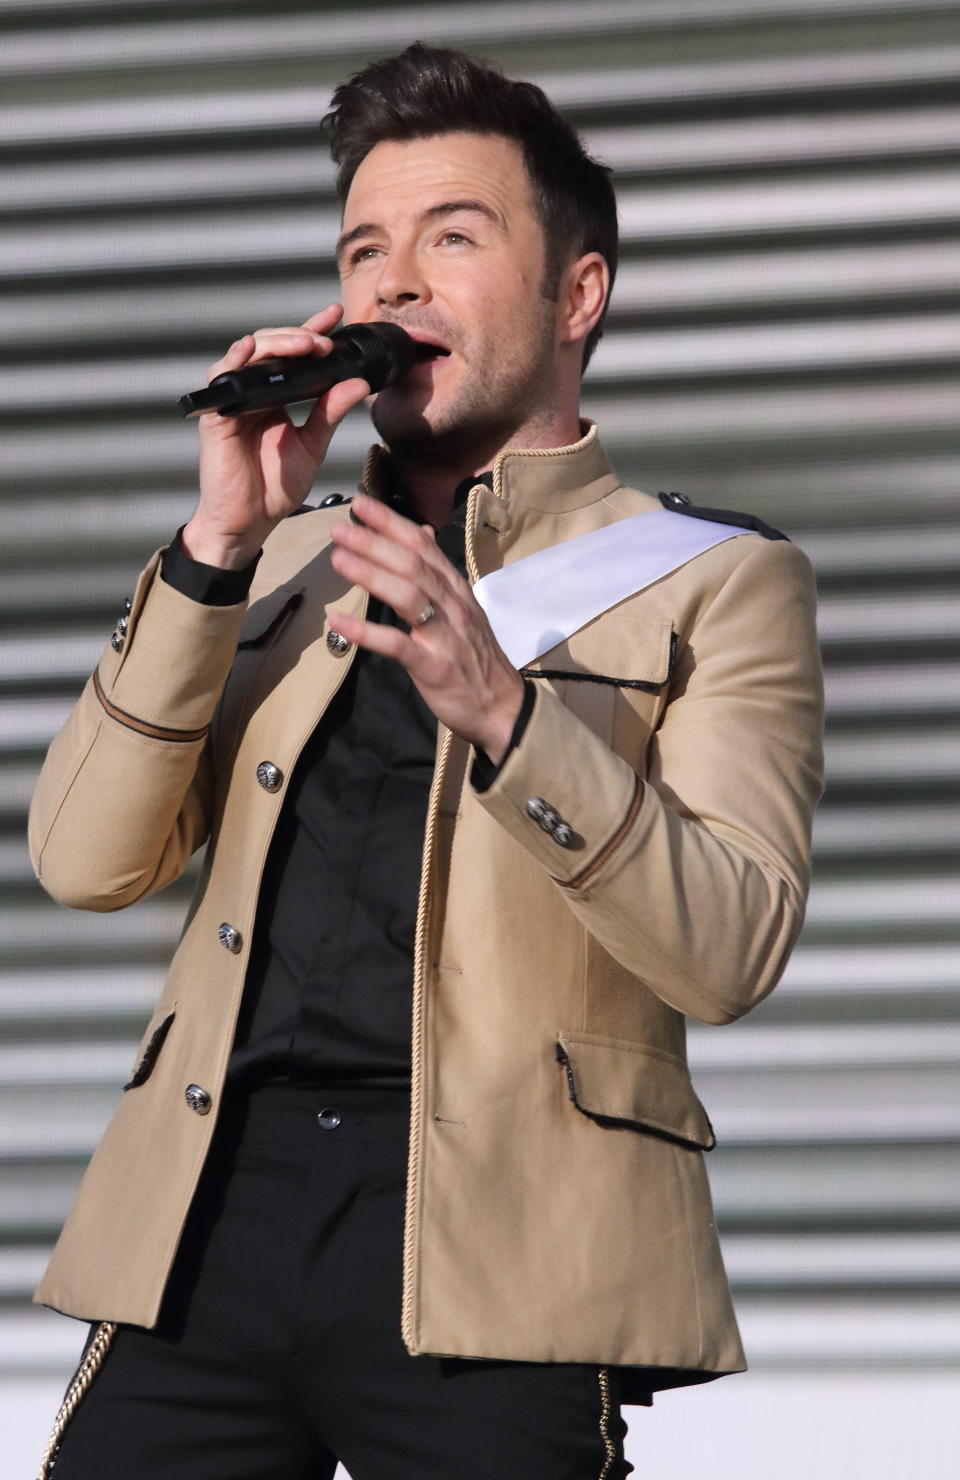 Shane Filan of an Irish Pop vocal group (Westlife) performs live on stage at the BBC Radio 2 Live in Hyde Park, London. (Photo by Keith Mayhew / SOPA Images/Sipa USA)